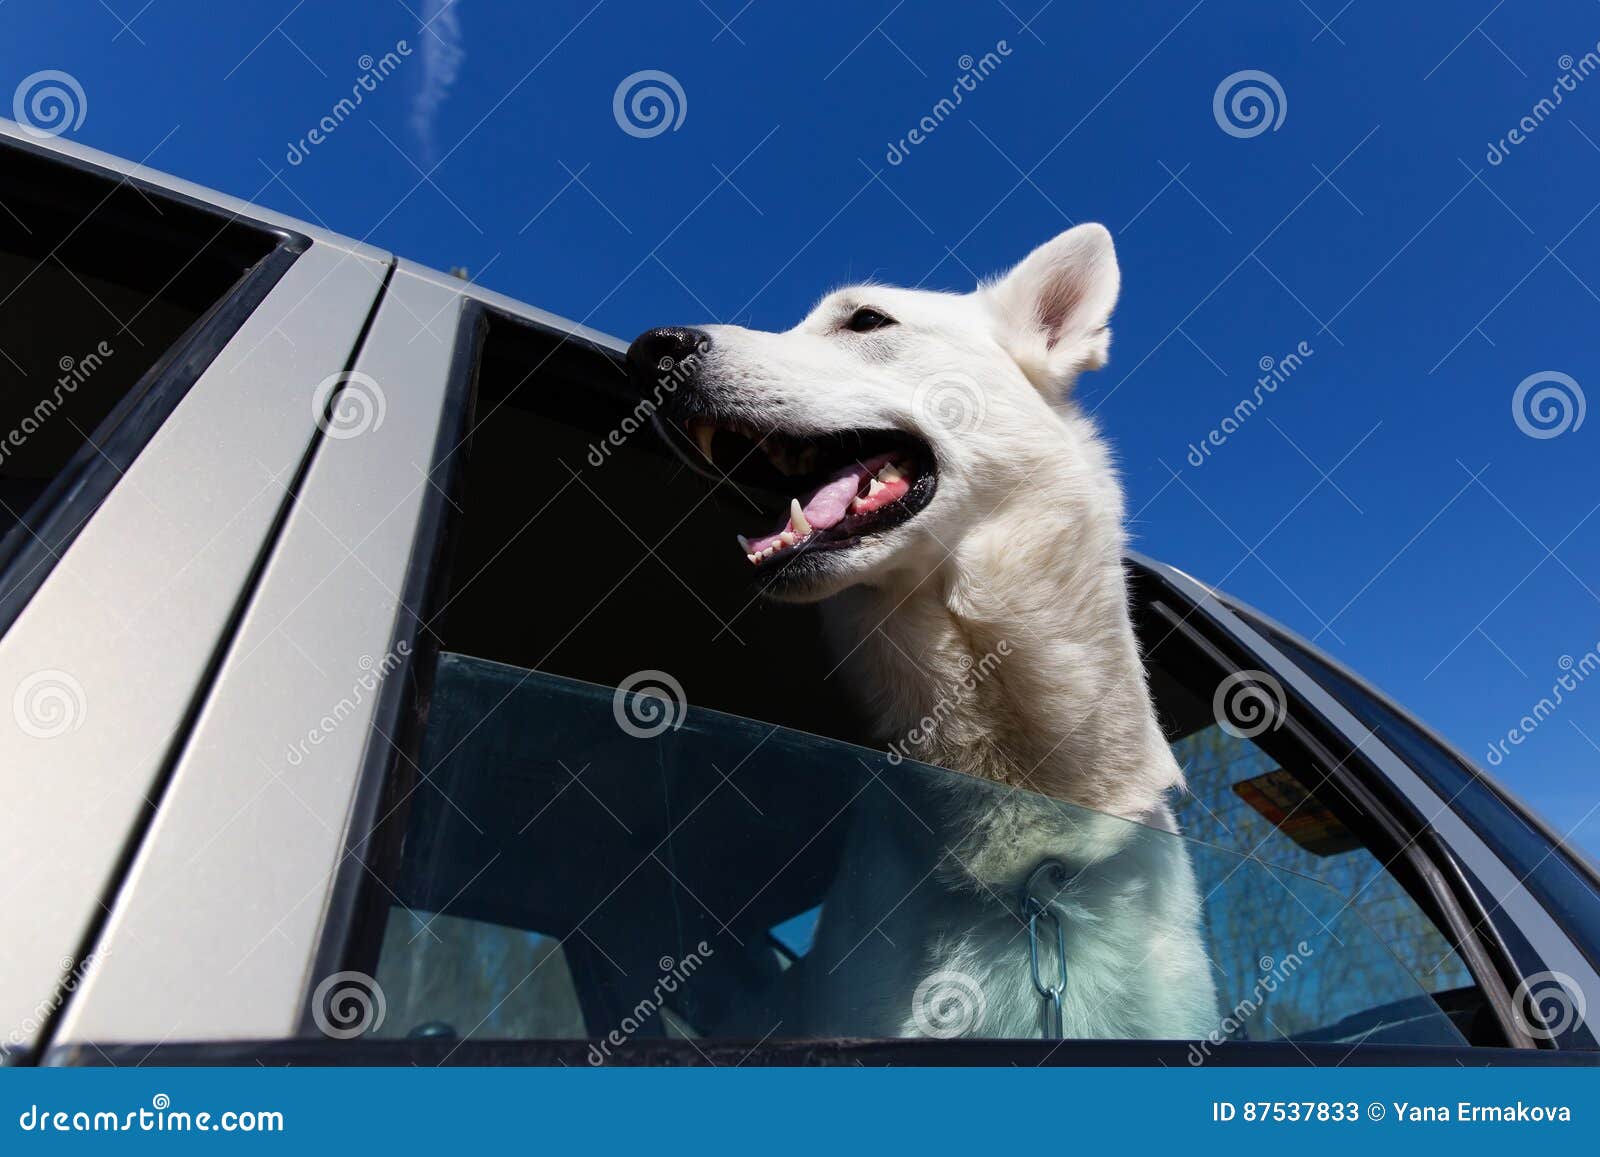 White Dog Looking Out of Car Window Stock Image - Image of beauty ...